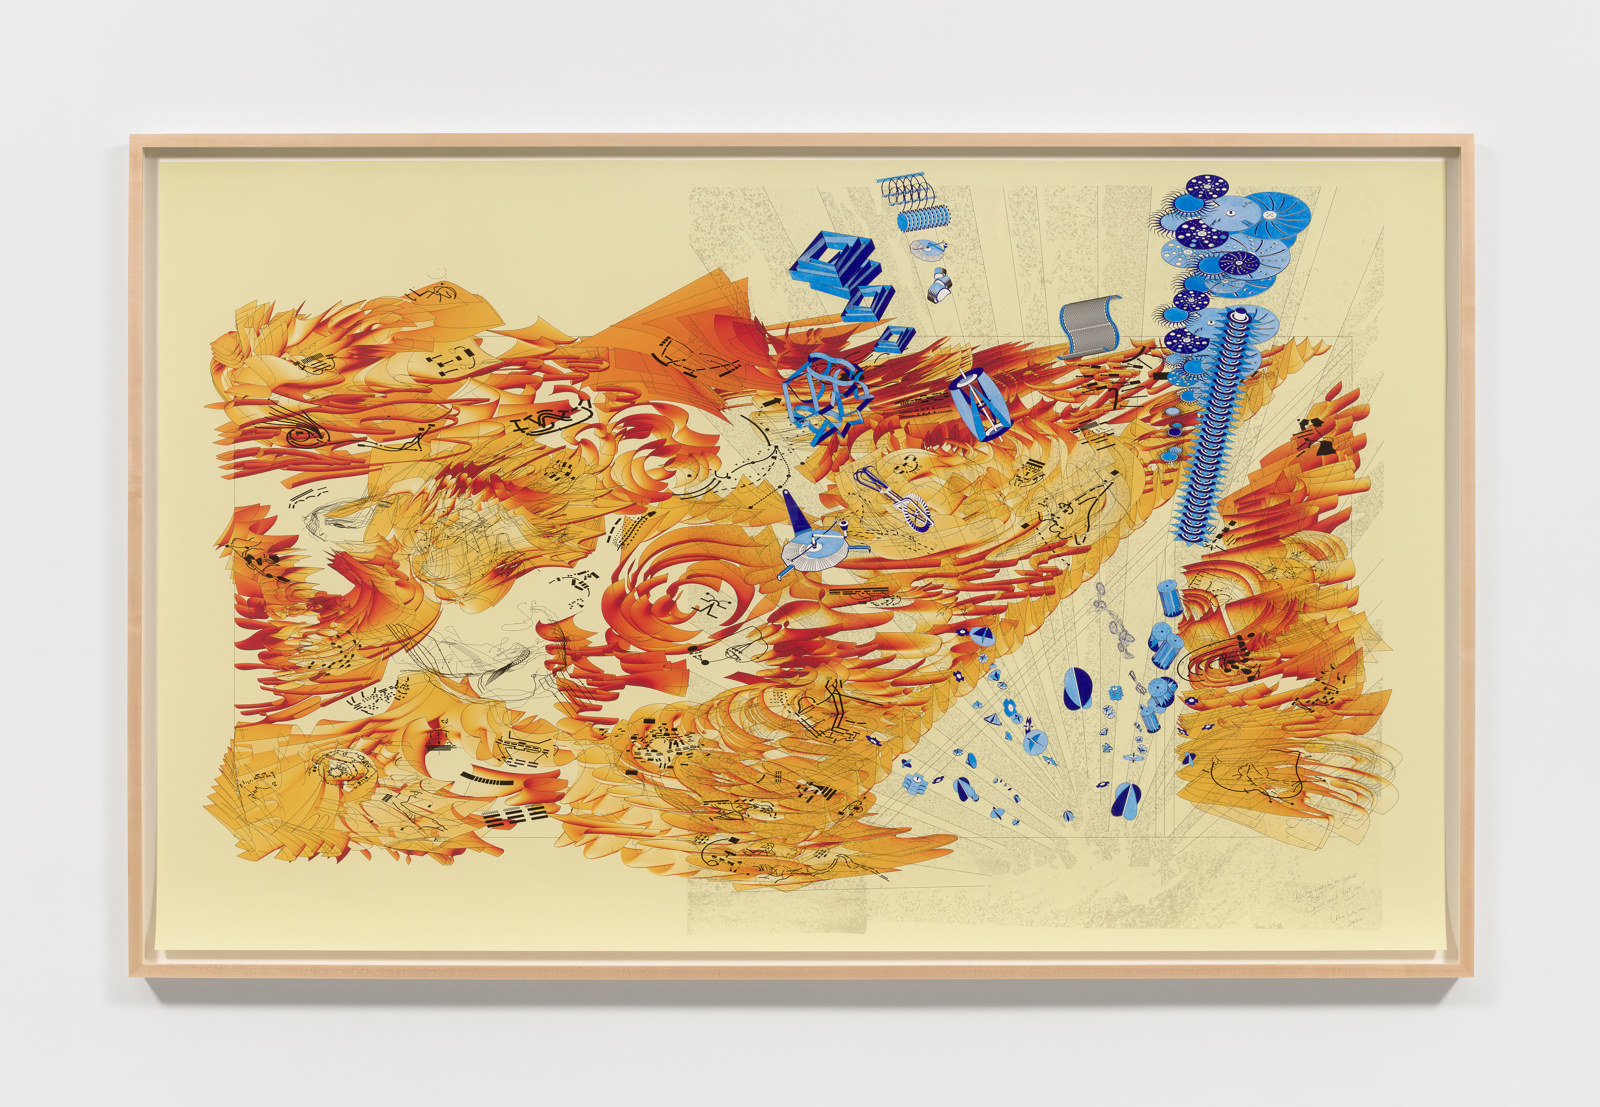 Alice Aycock: Works on Paper named an ArtForum “Must See” Exhibition